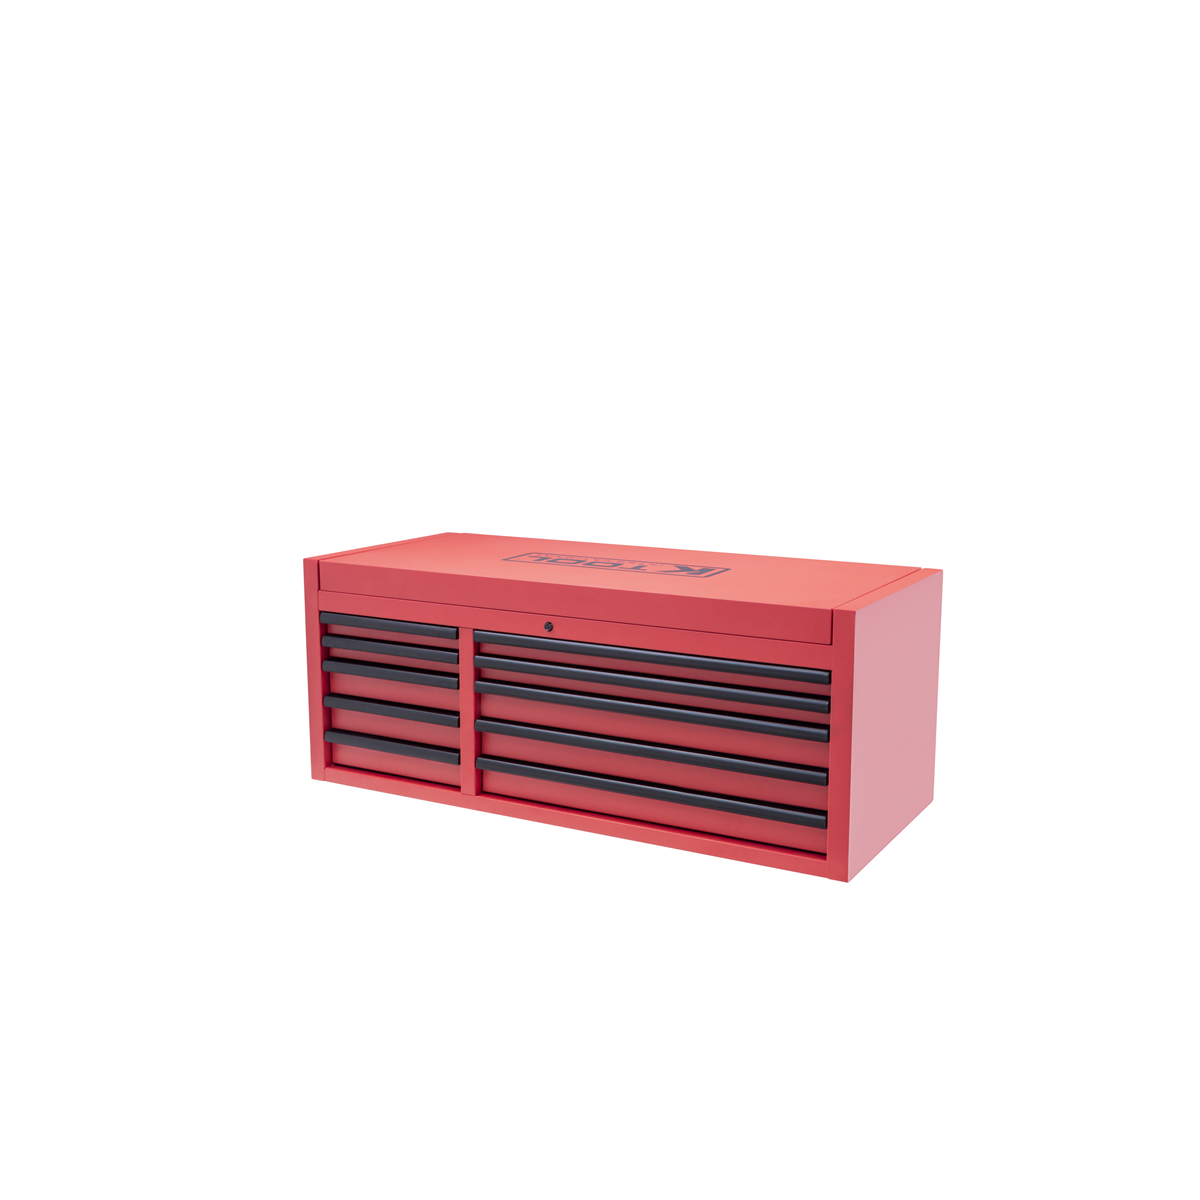 Picture of K Tool International KTI75135 55 in. 500 lbs Premium 10 Drawer Double Bay Tool Box, Matte Red